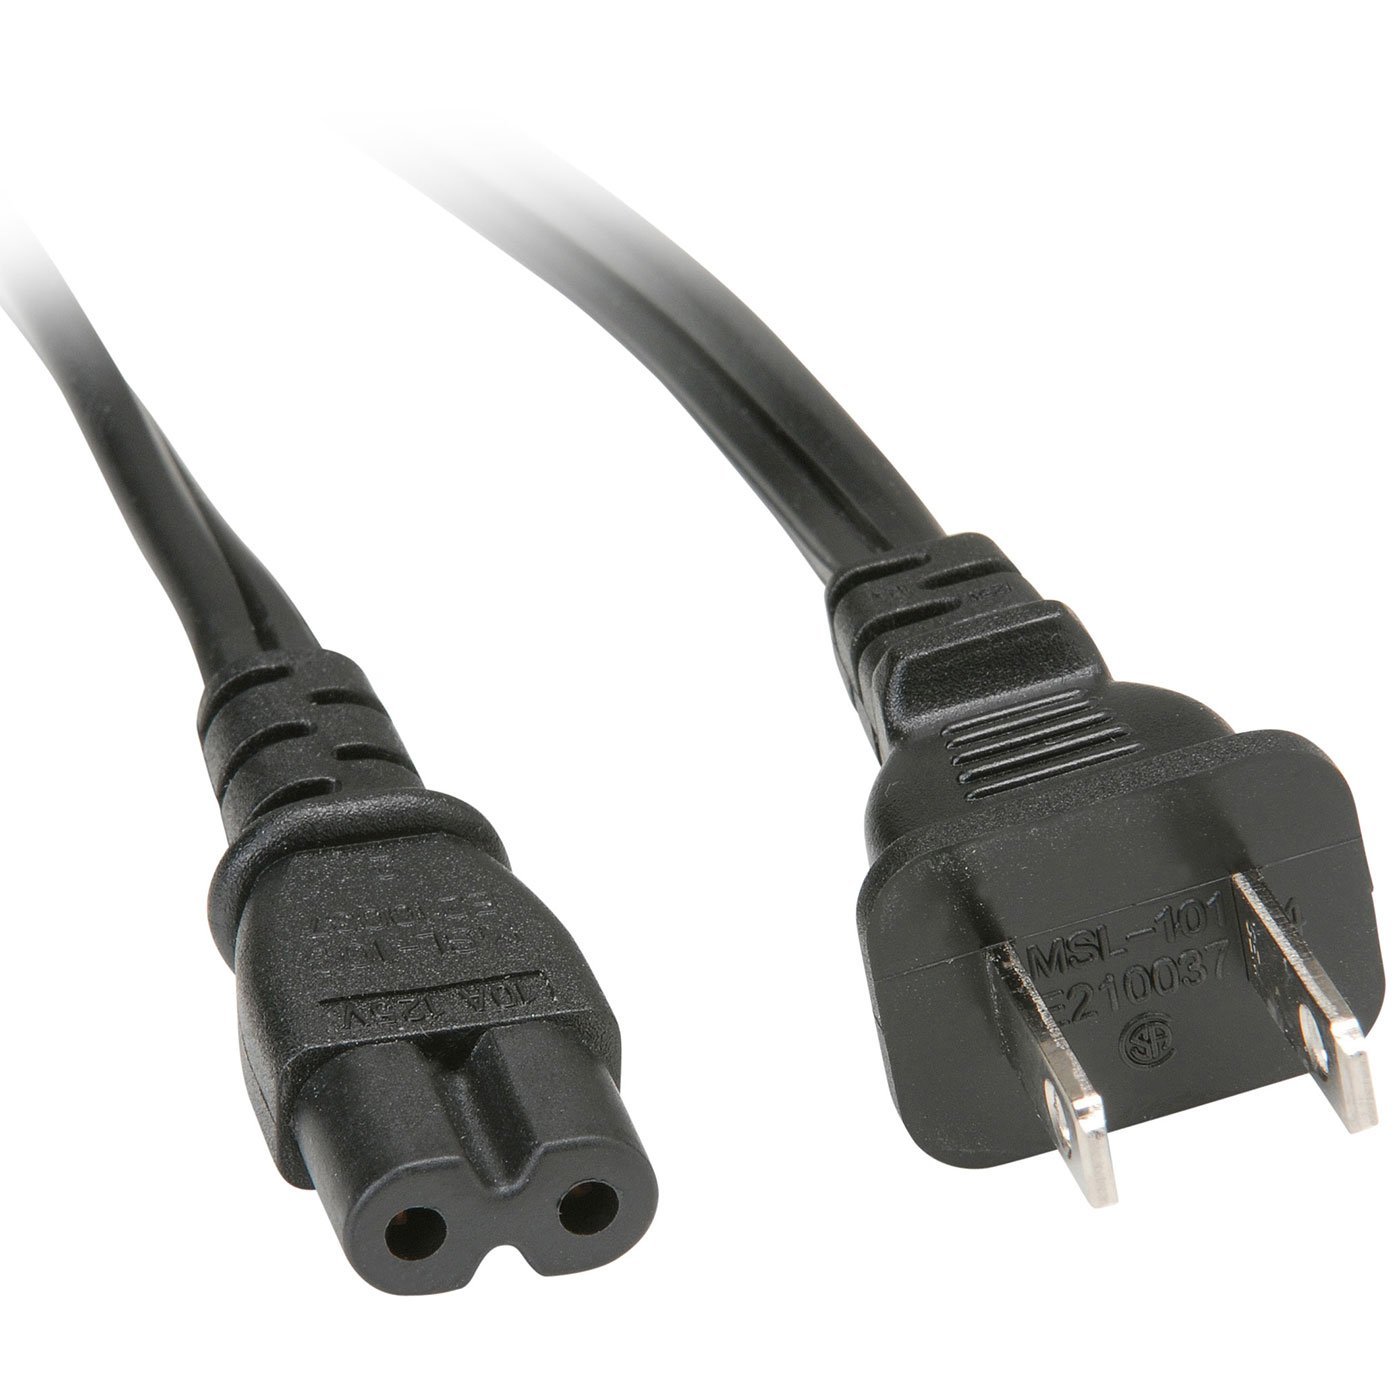 OMNIHIL AC Power Cord for HP Photosmart 1115, 1218, 5510, 5520, 6510, 6520, B211 Printers - image 1 of 2